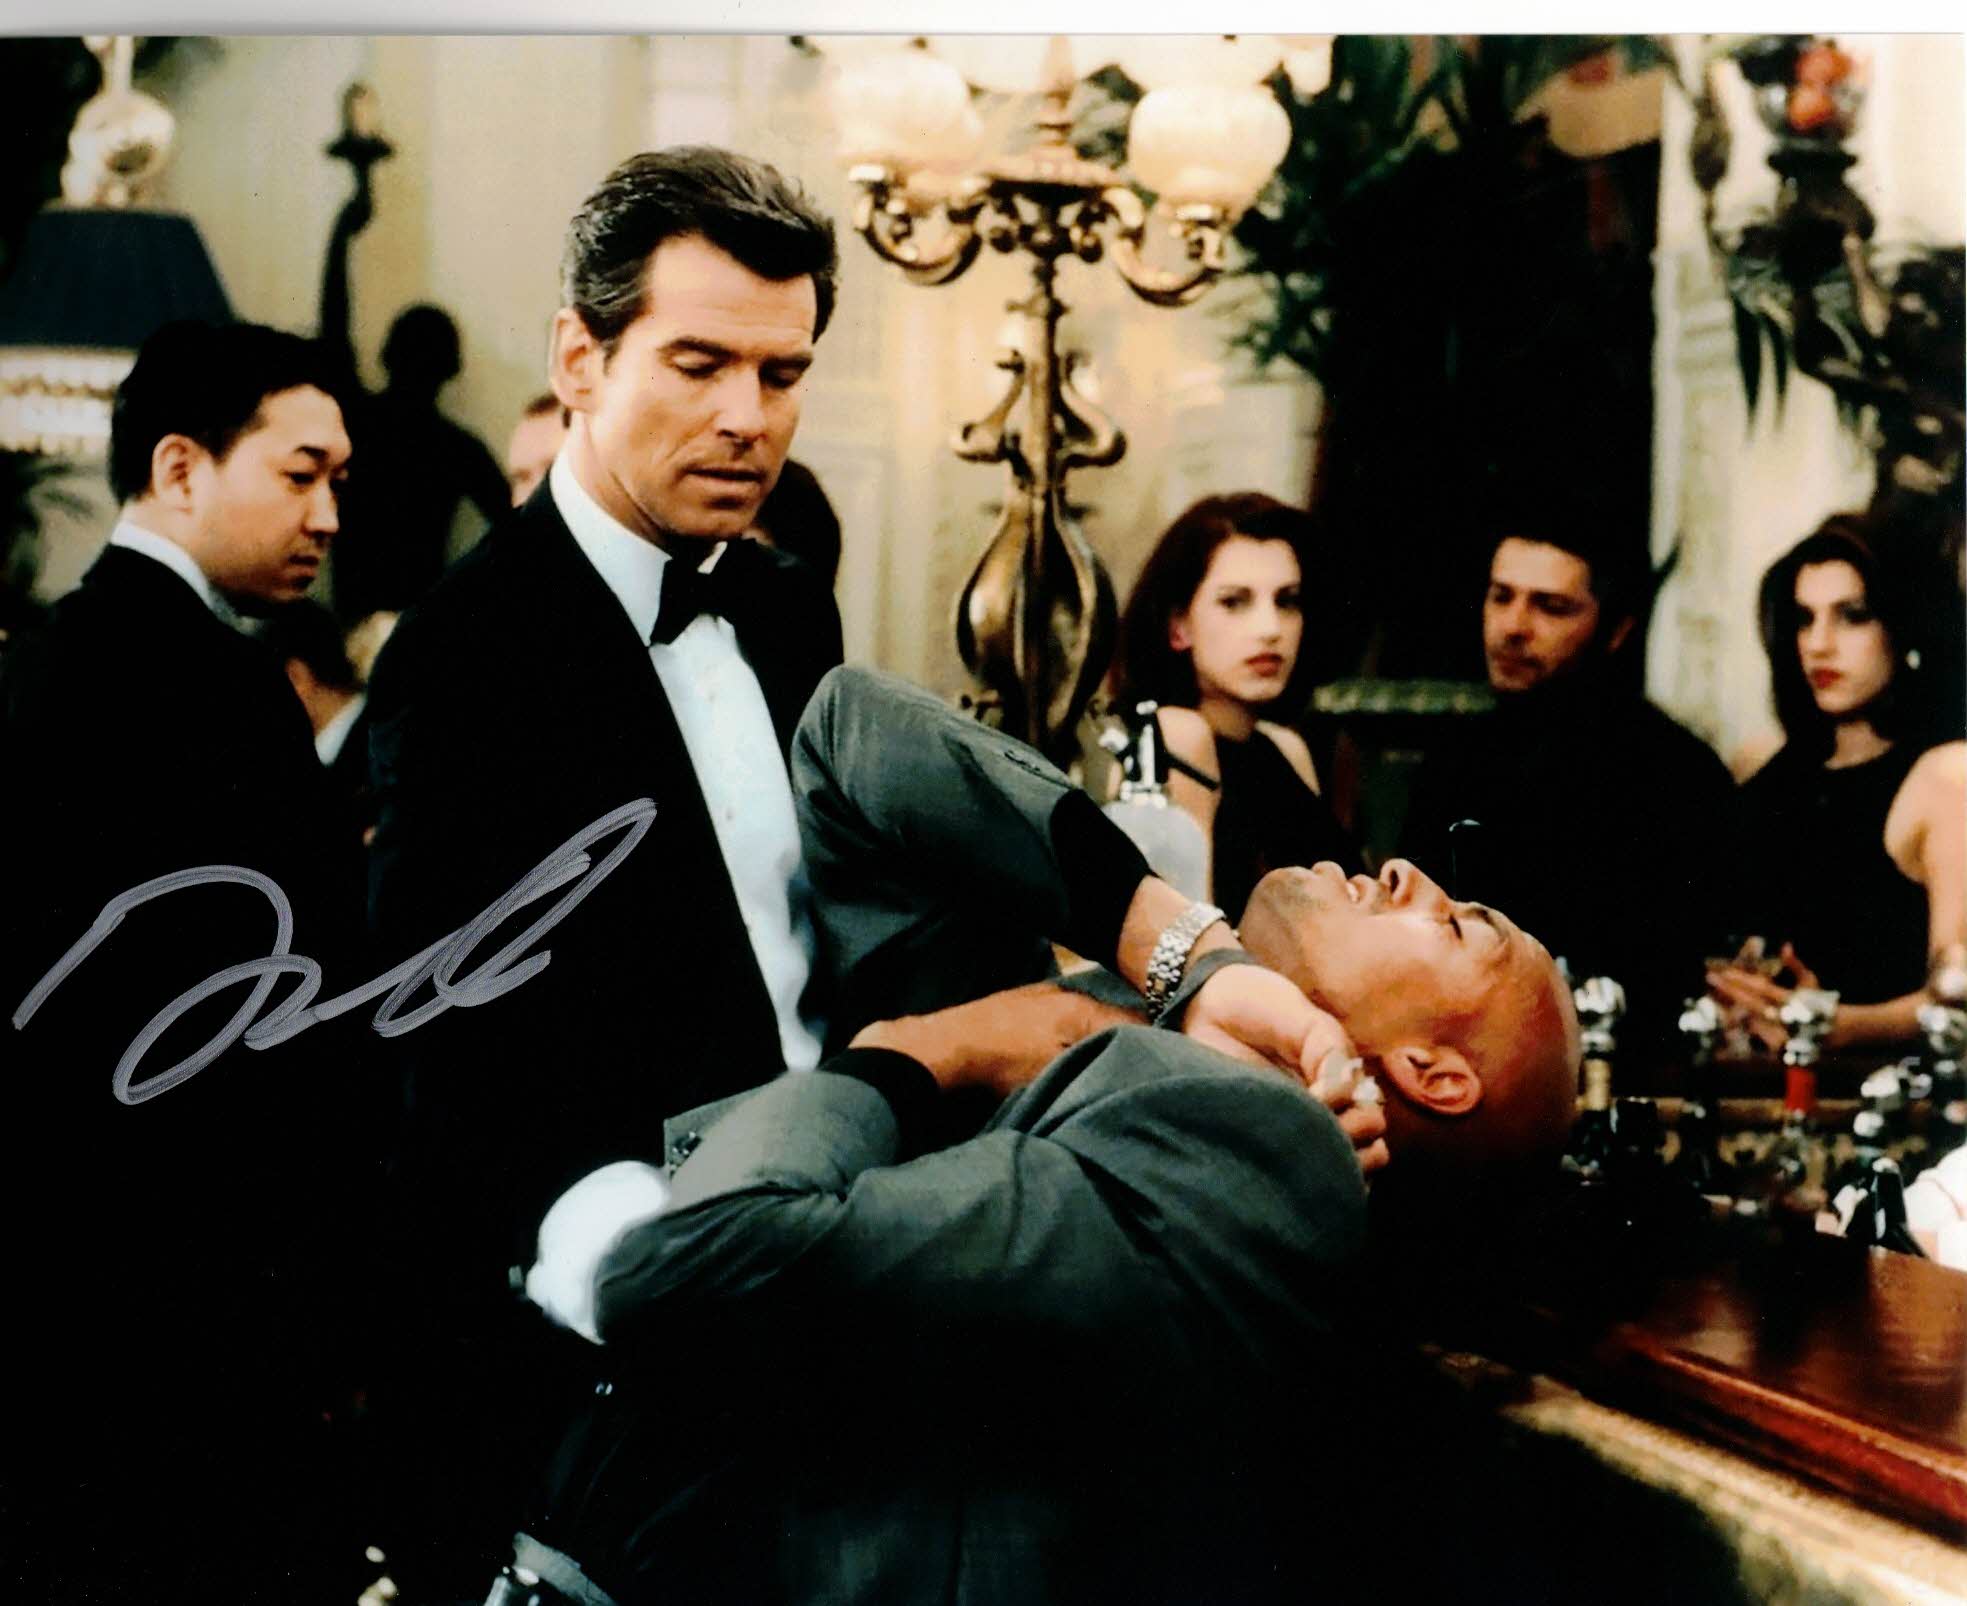 DAZ CRAWFORD - Casino Thug in The World Is Not Enough - James Bond - Hand signed 10 x 8 photo